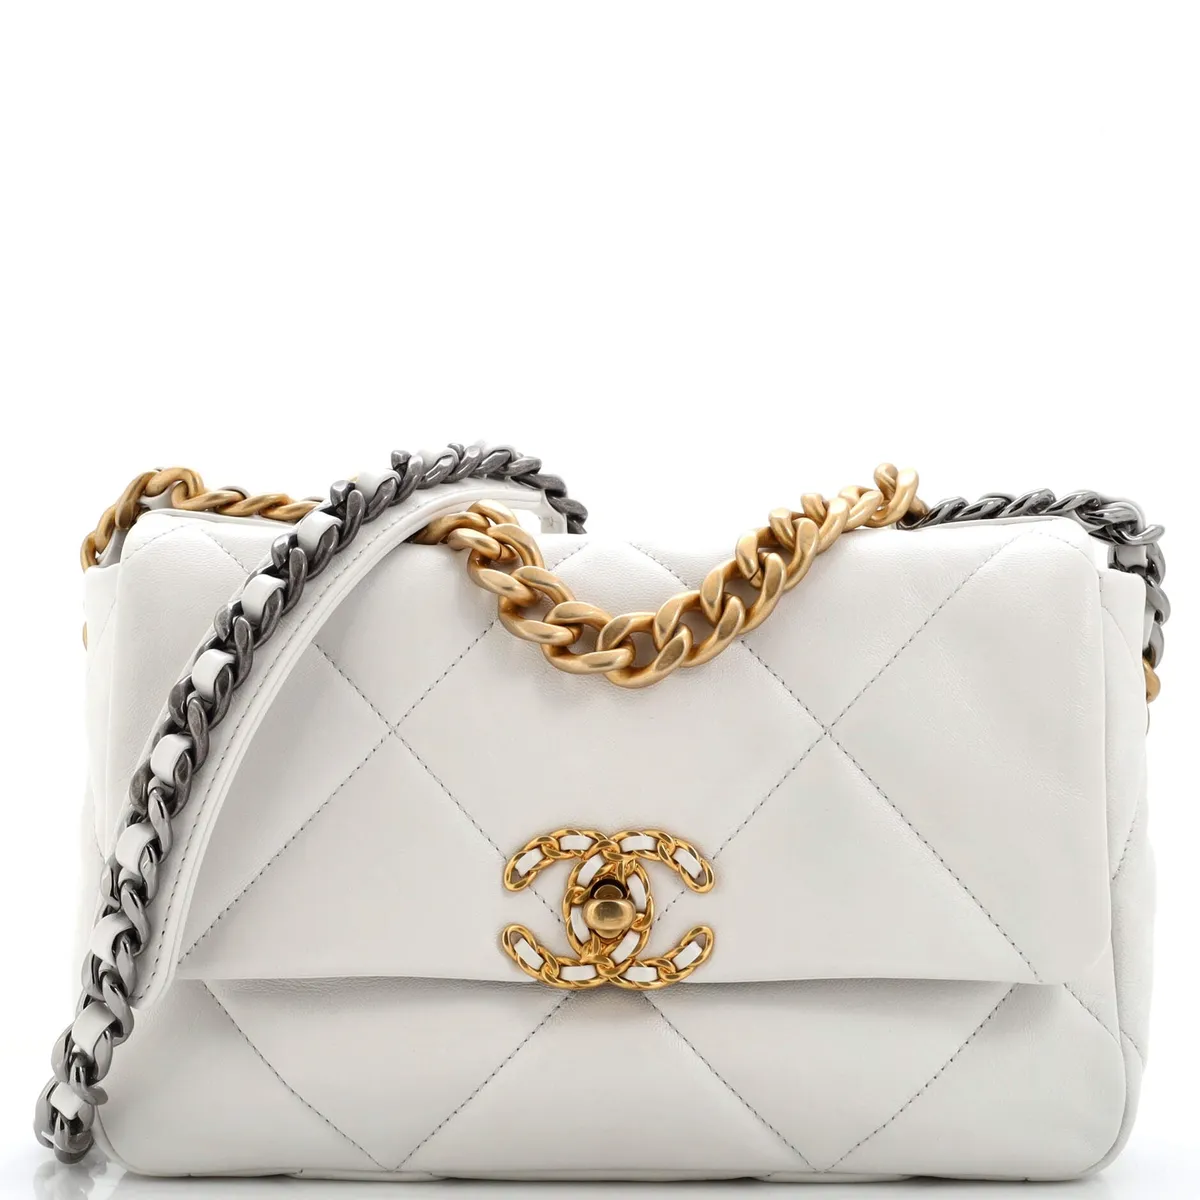 Chanel 19 Flap Bag Quilted Leather Medium White